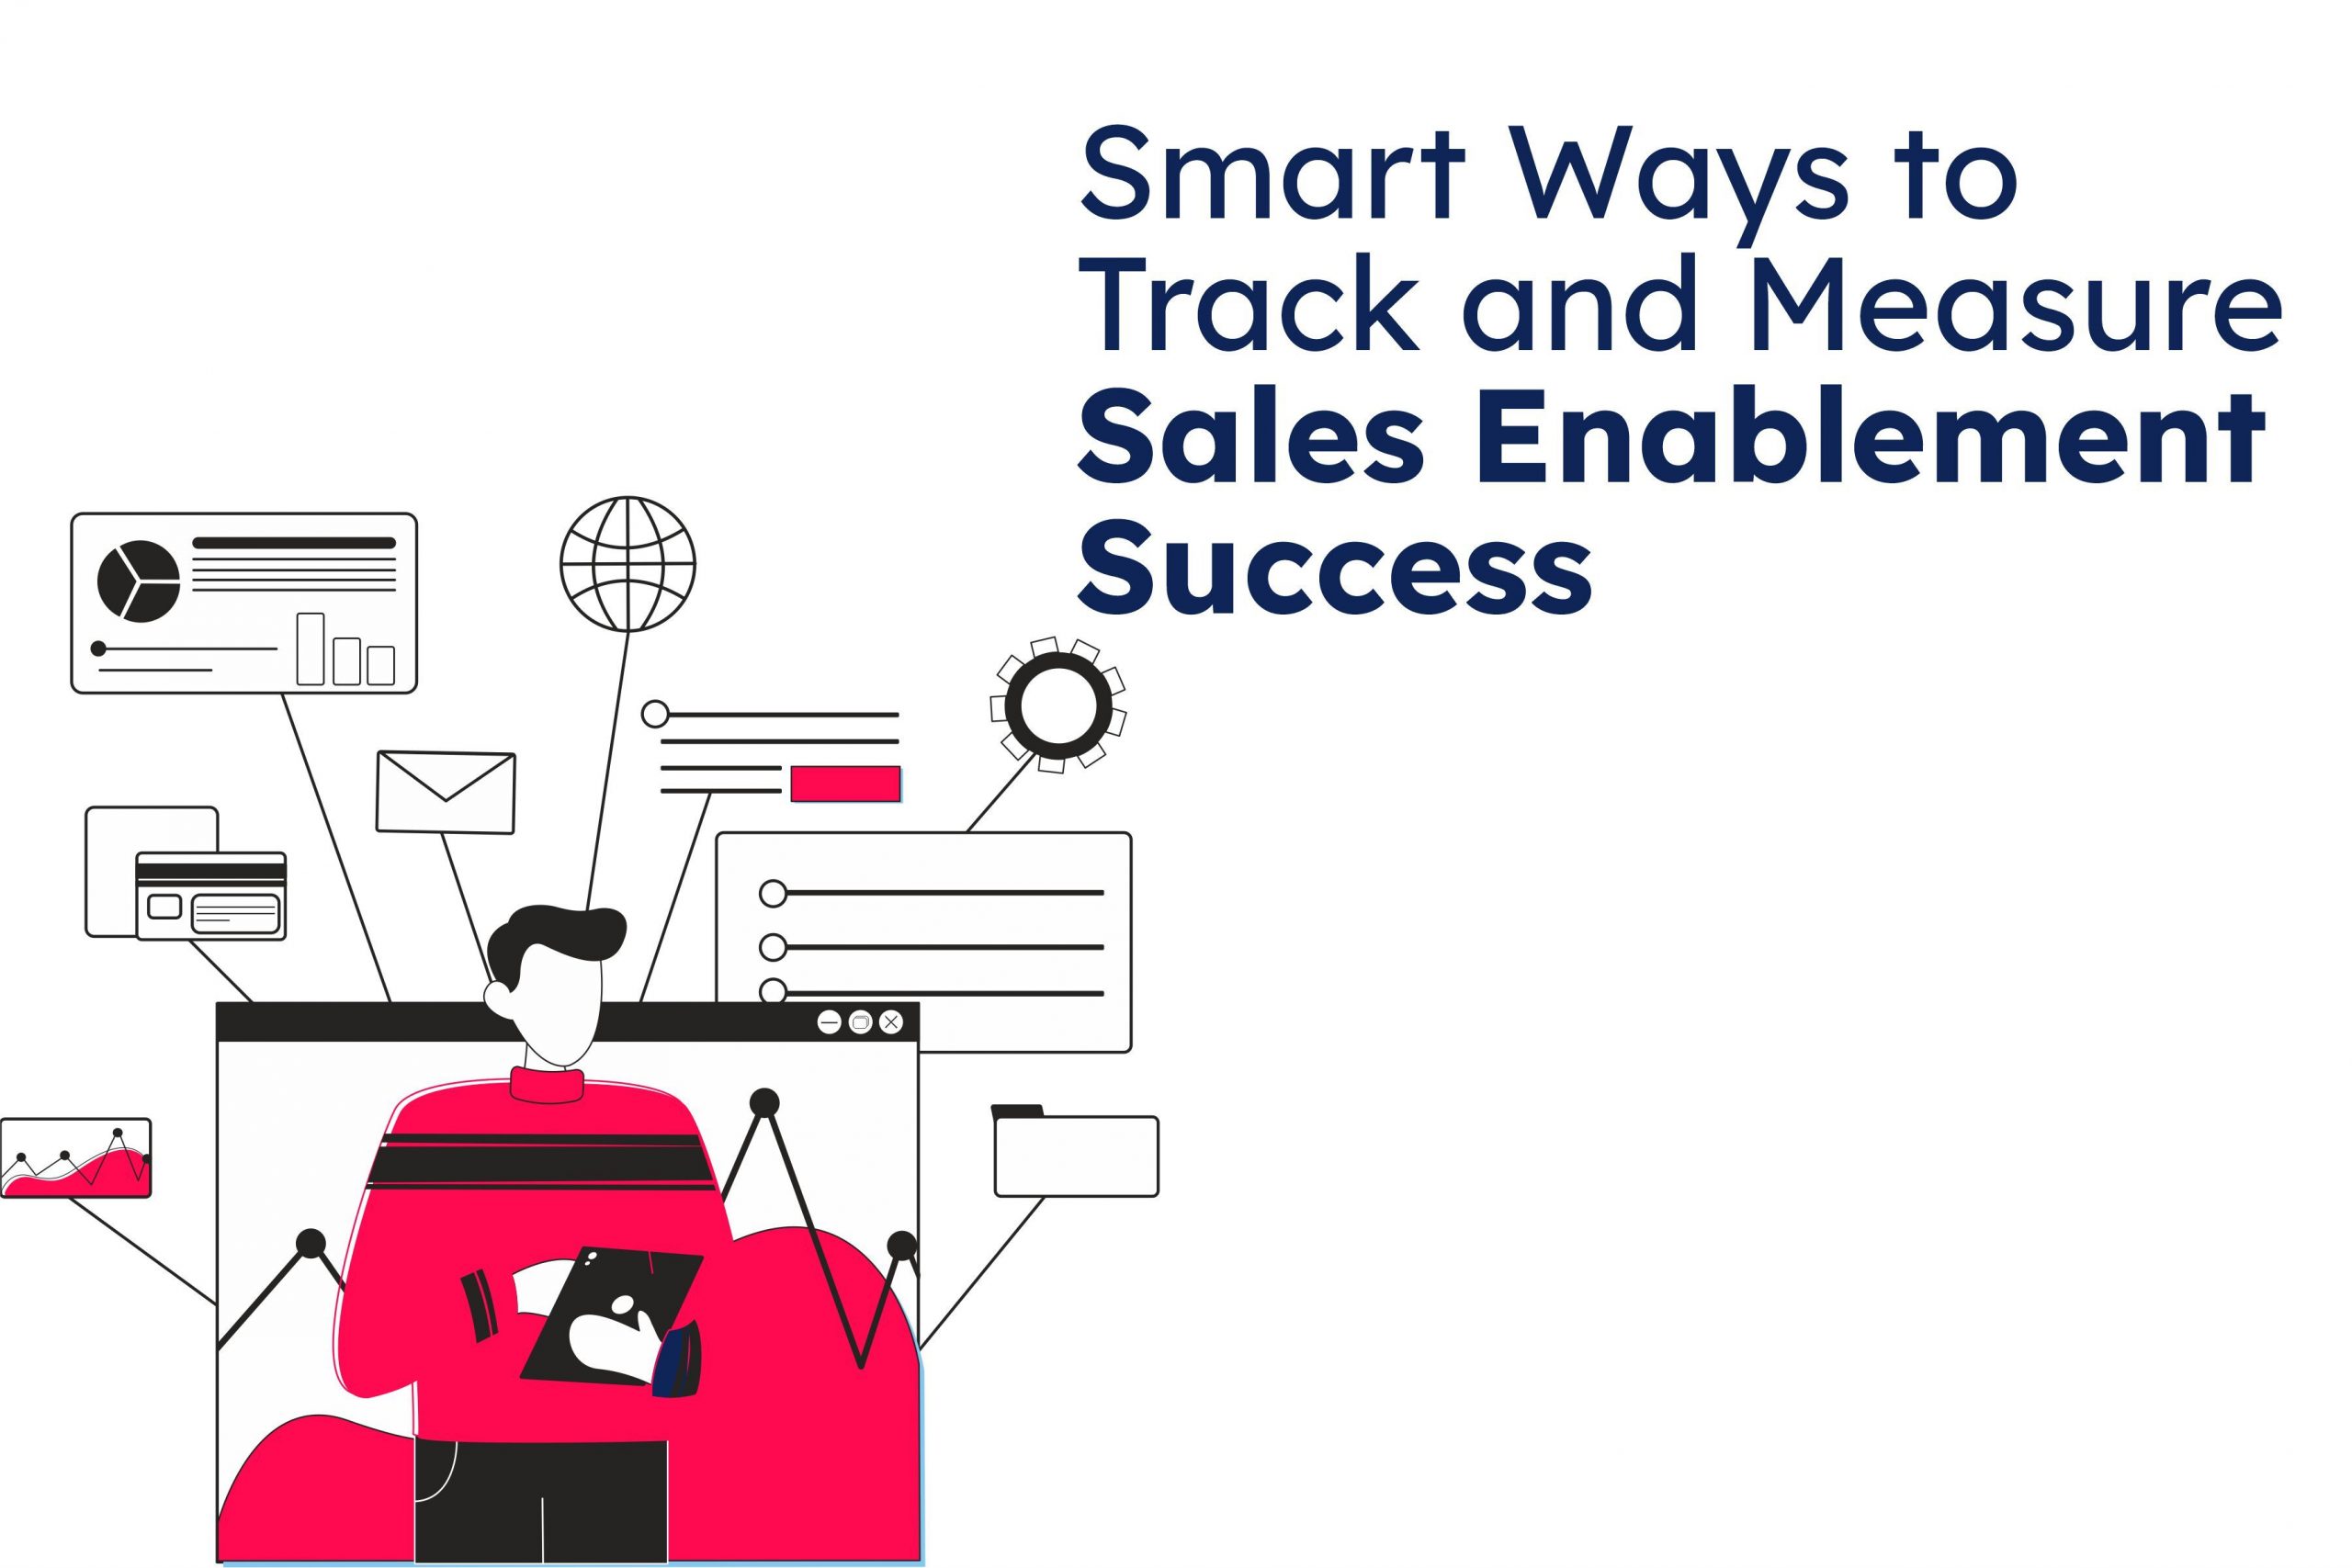 Smart Ways to Track and Measure Sales Enablement Success